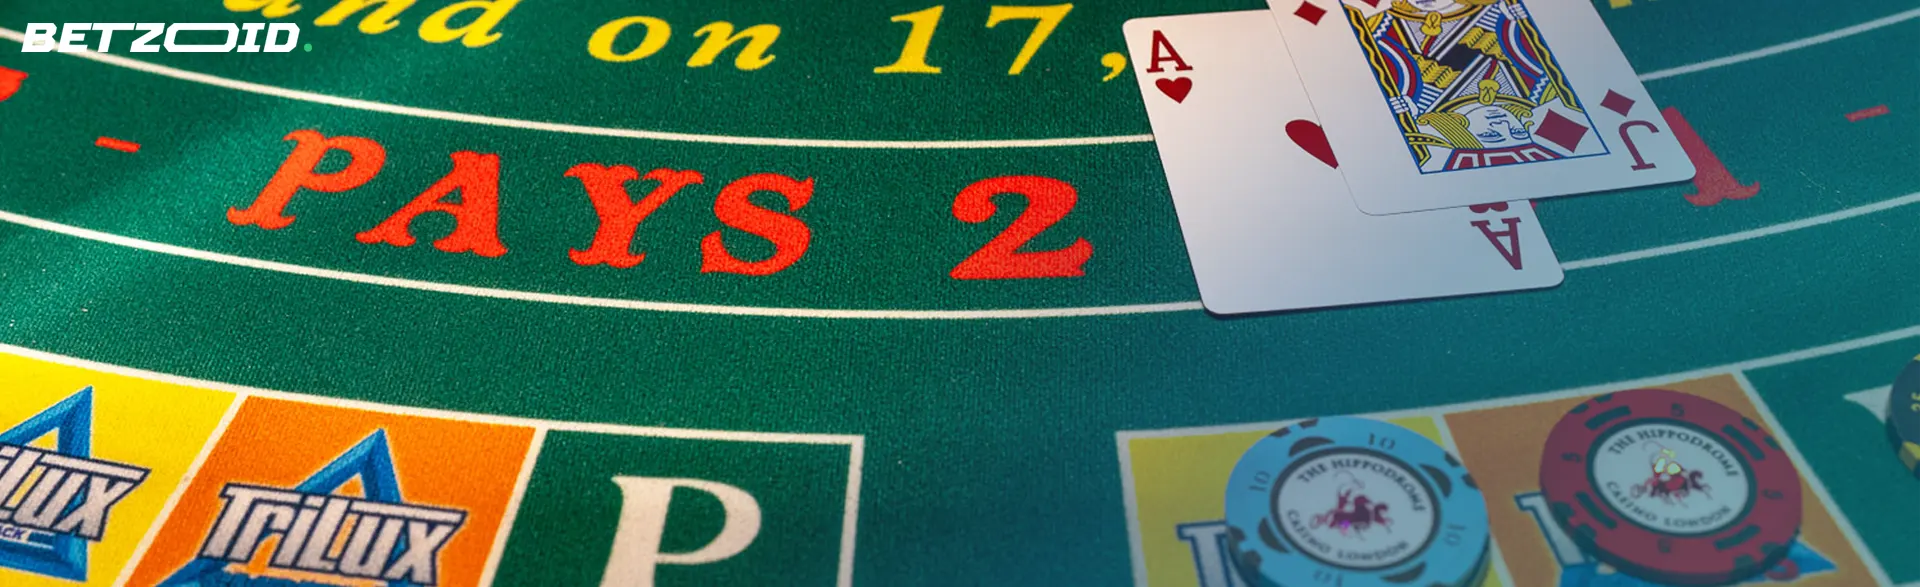 A pair of blackjack cards on a green felt table, symbolizing the excitement and anticipation of playing blackjack at online casinos.